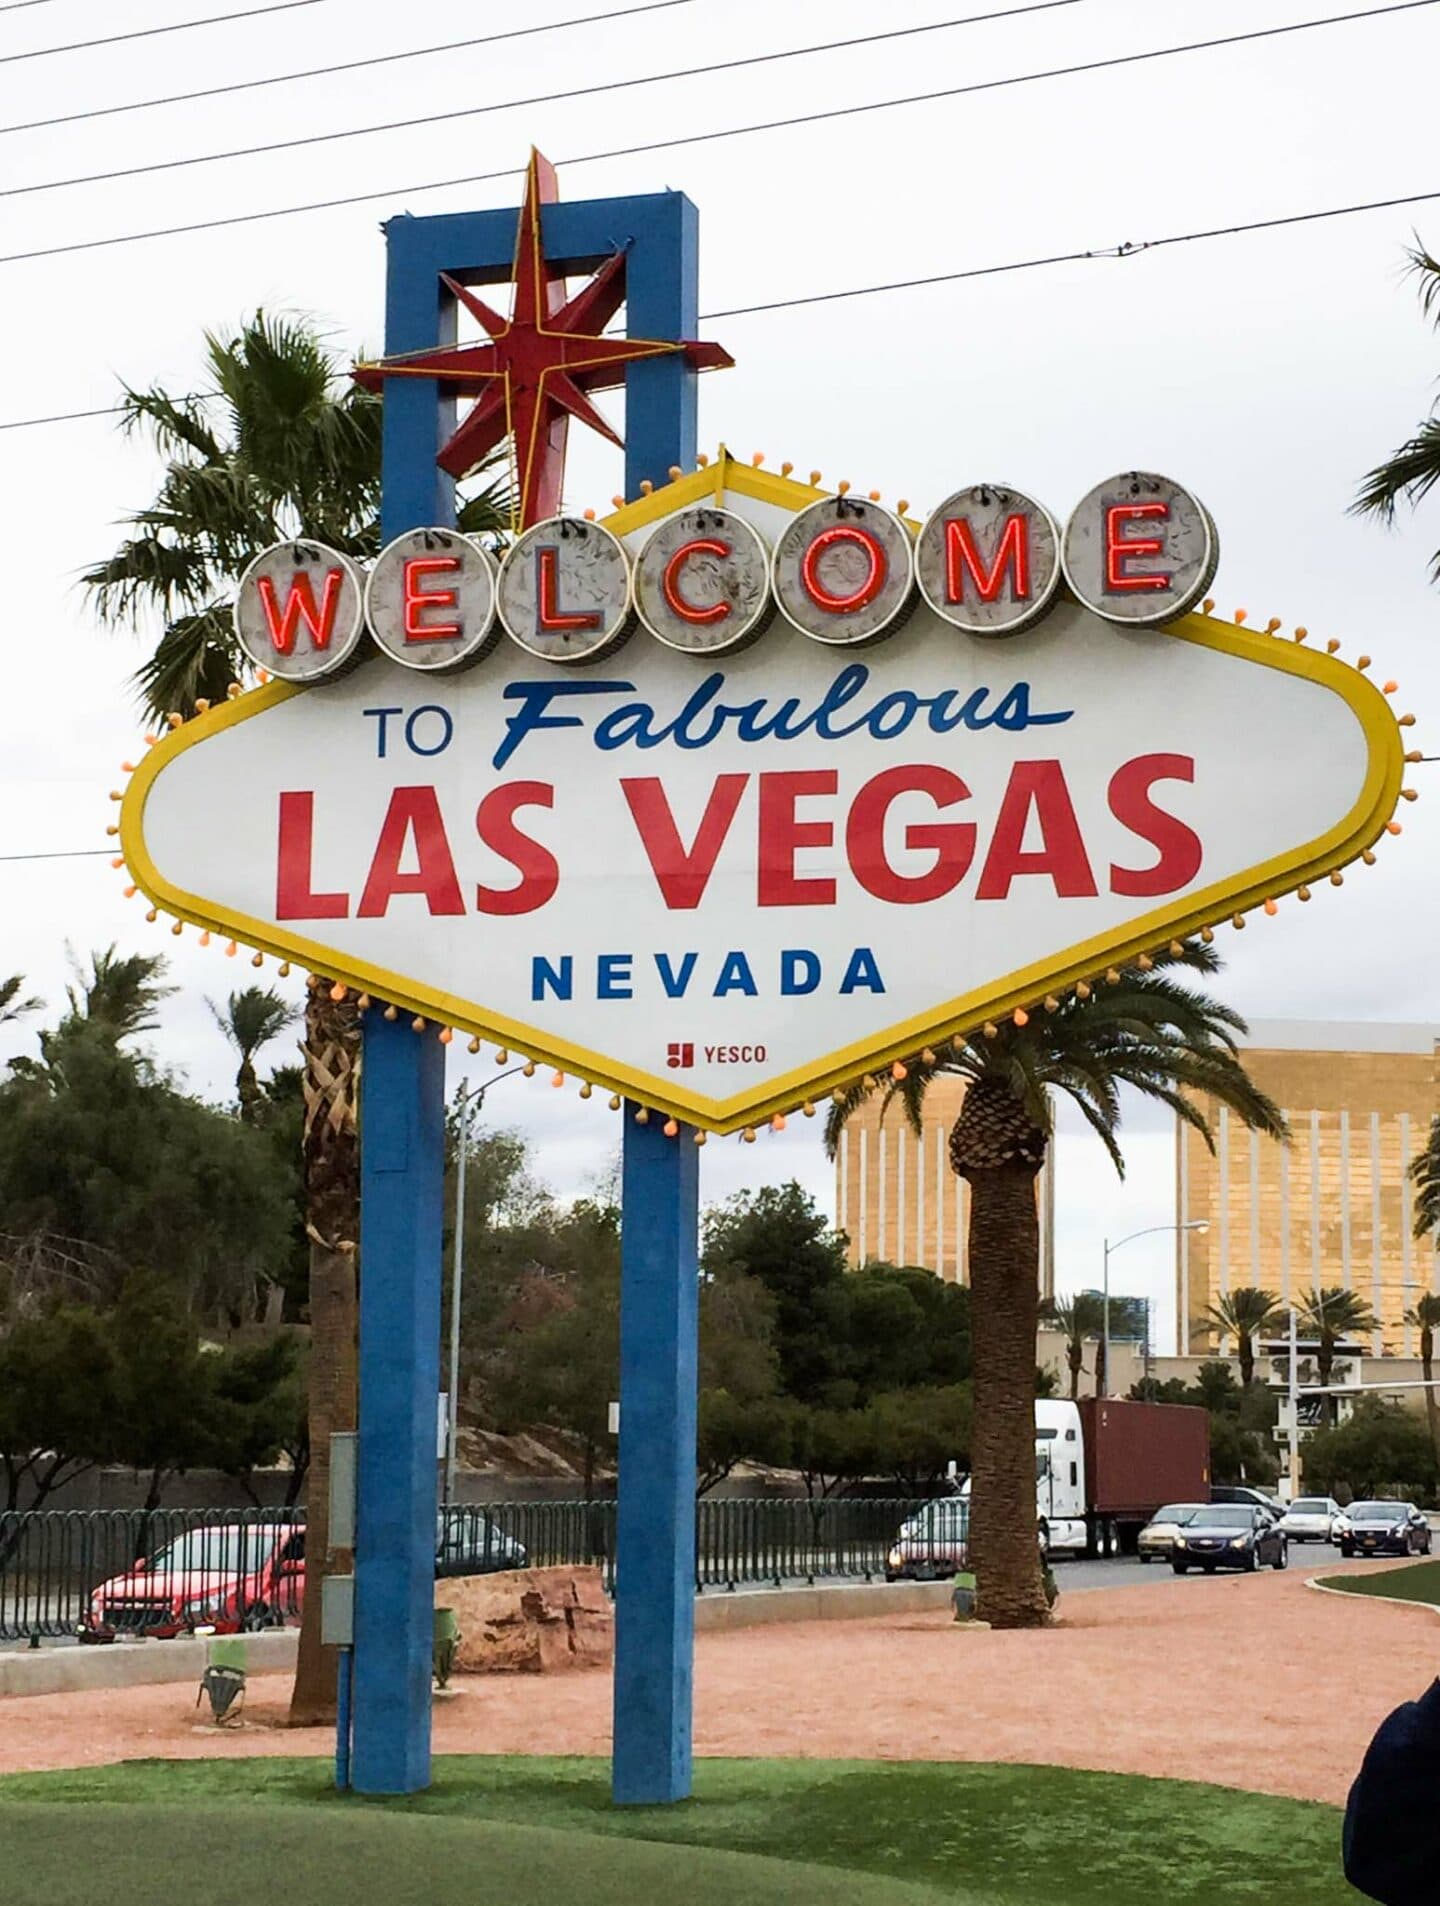 The famous Las Vegas sign is a short drive from the main action on the strip.